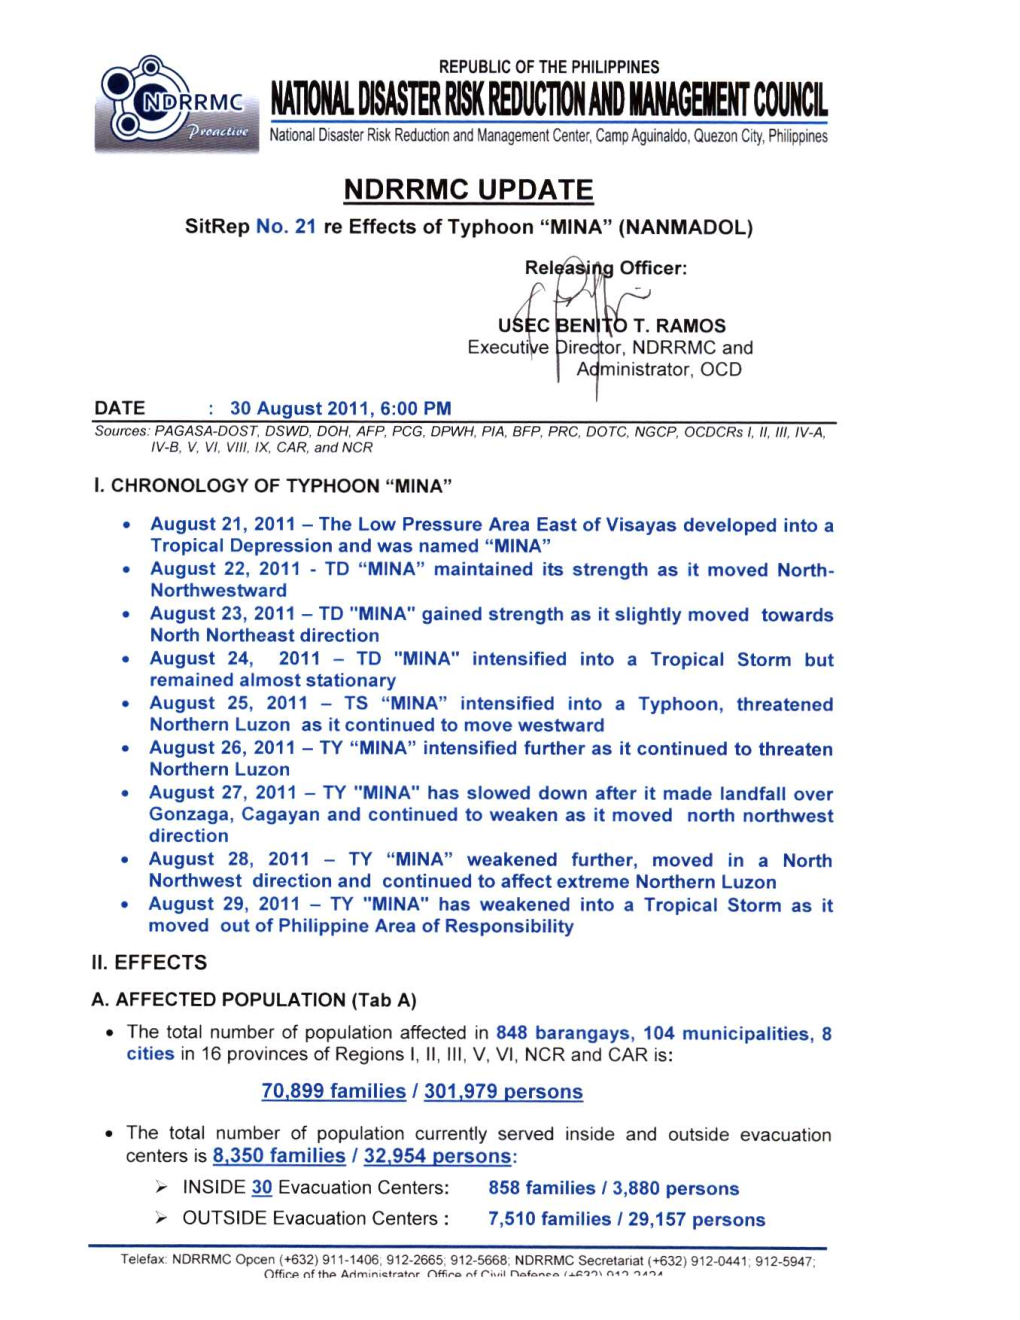 NDRRMC Update Sitrep No. 21 Re Effects of TY MINA 30 August 2011